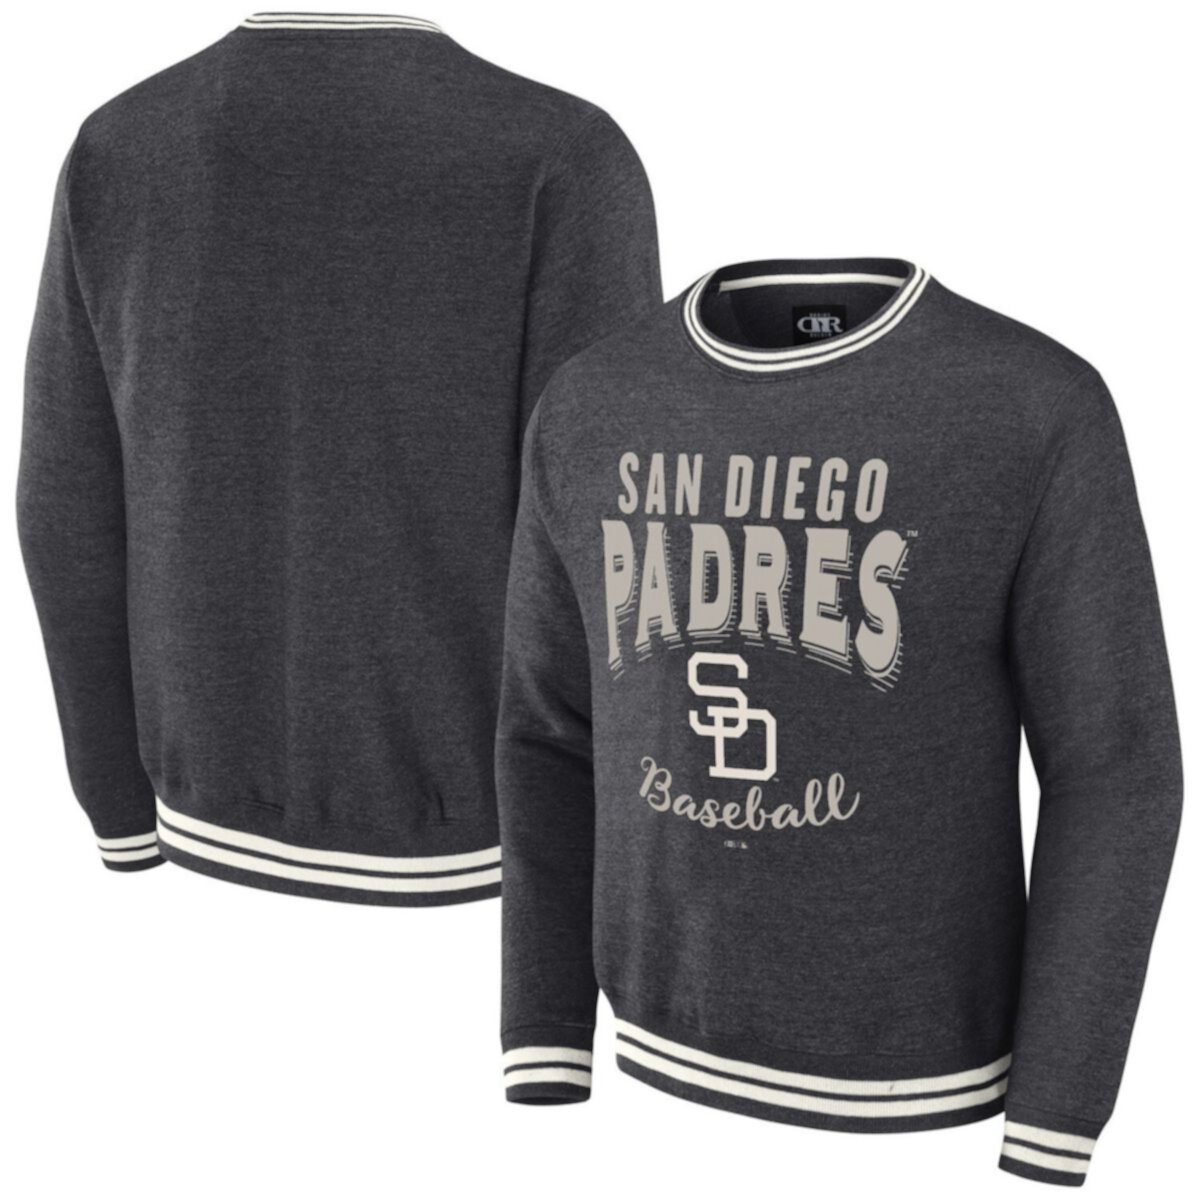 Men's Darius Rucker Collection by Fanatics  Heather Charcoal San Diego Padres Vintage Pullover Sweatshirt Darius Rucker Collection by Fanatics